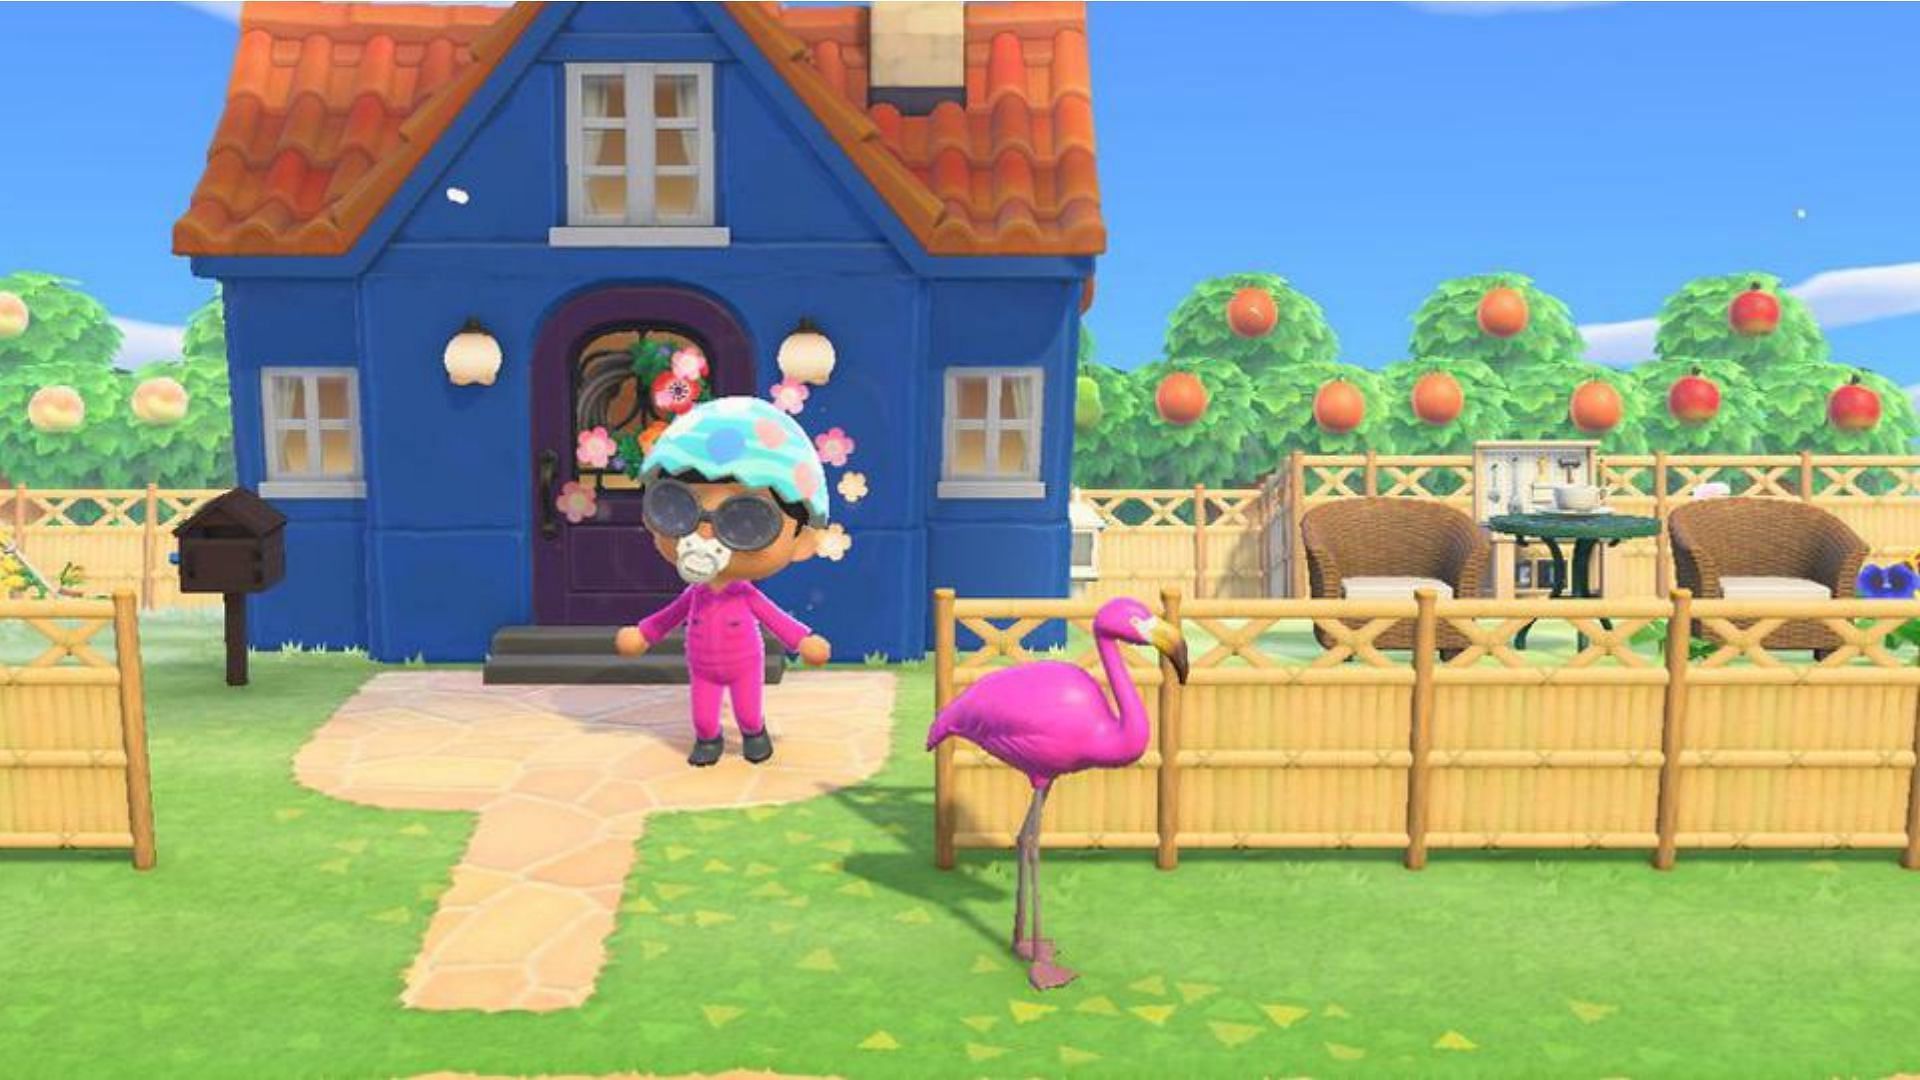 How to move your house in Animal Crossing: New Horizons